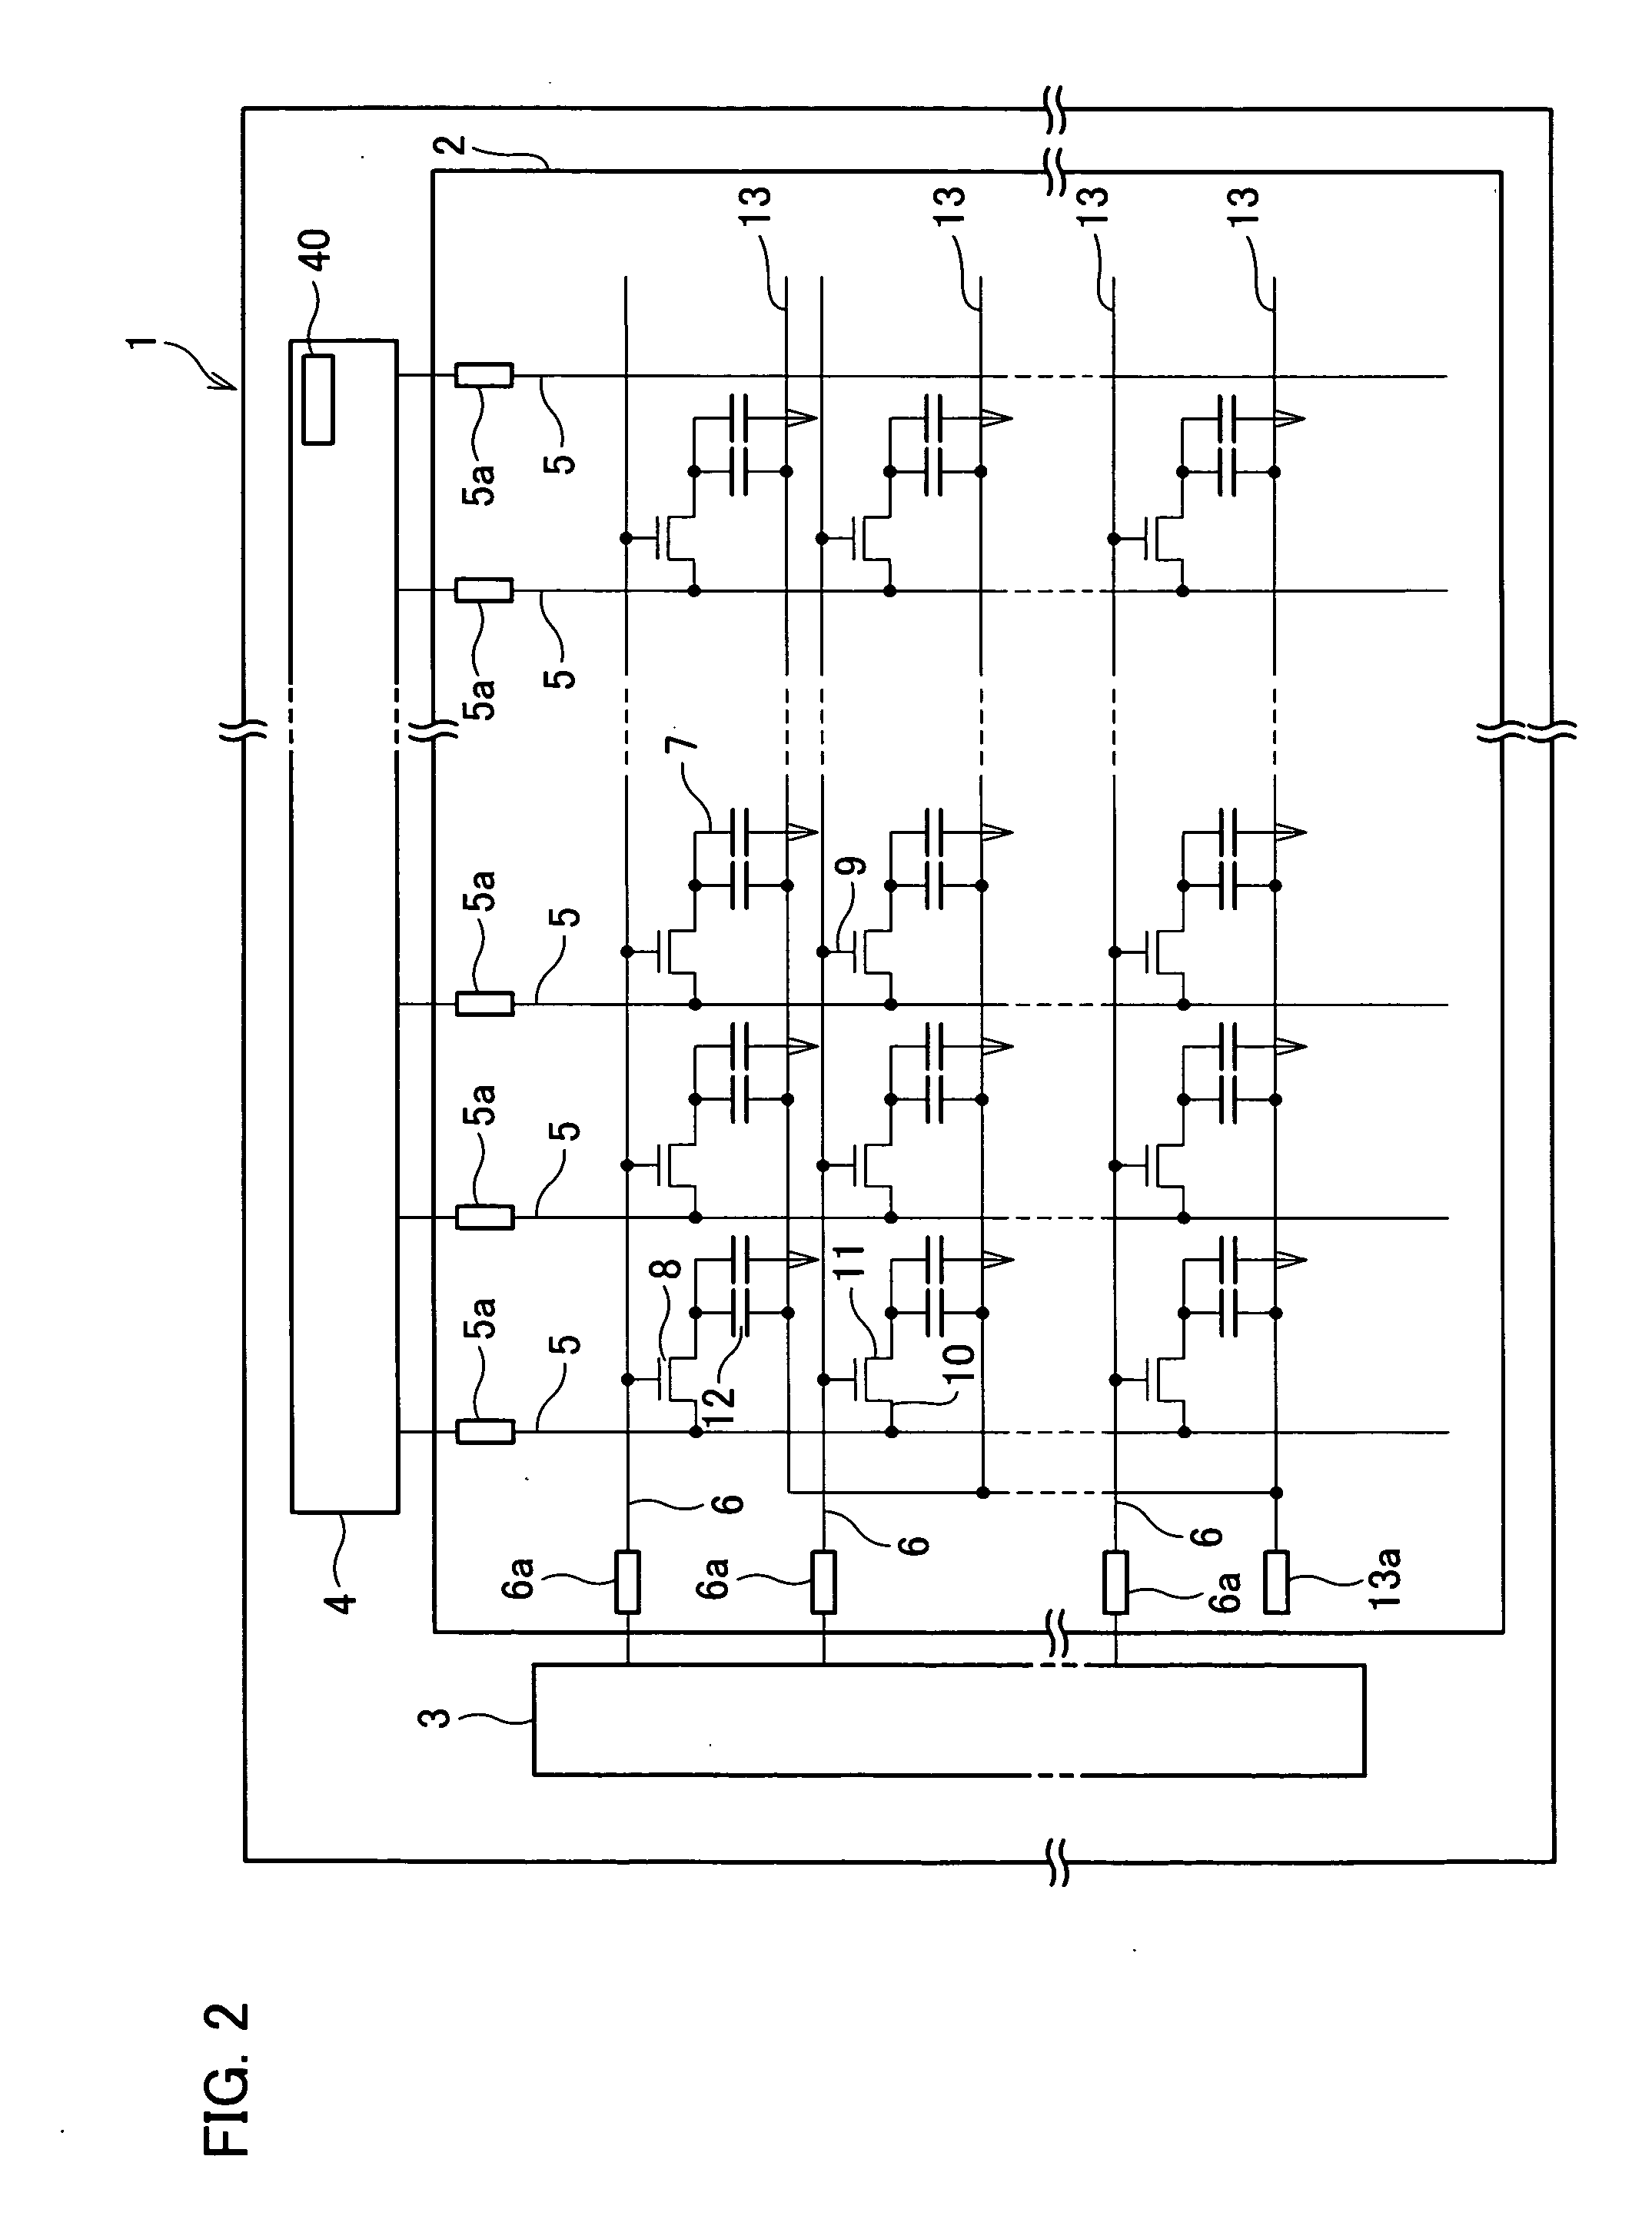 Liquid crystal display device and driving device thereof, and method for driving liquid crystal display device